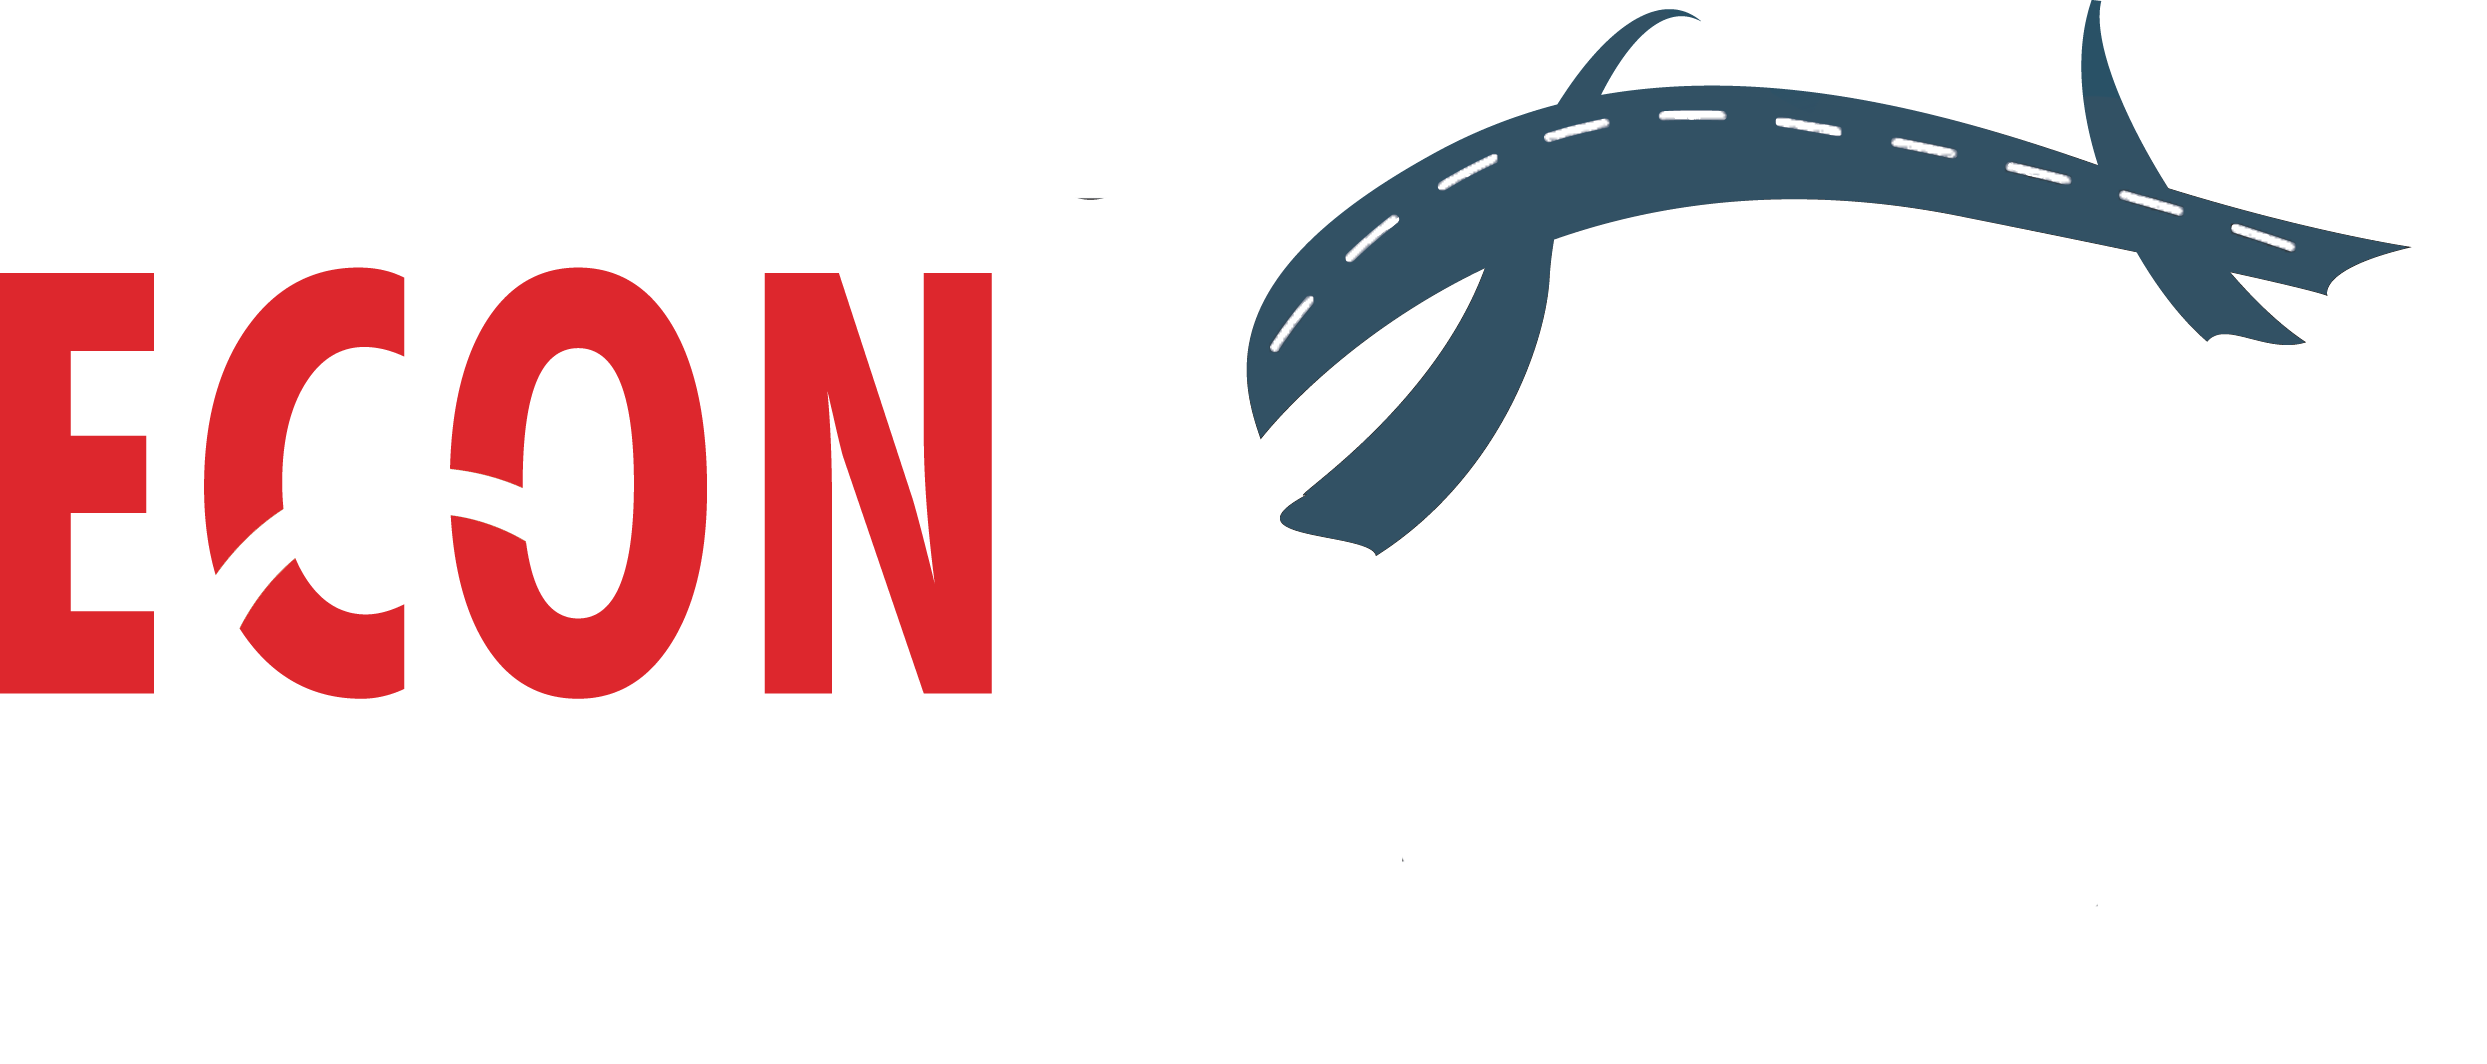 I-94 East-West Econ Connect Logo